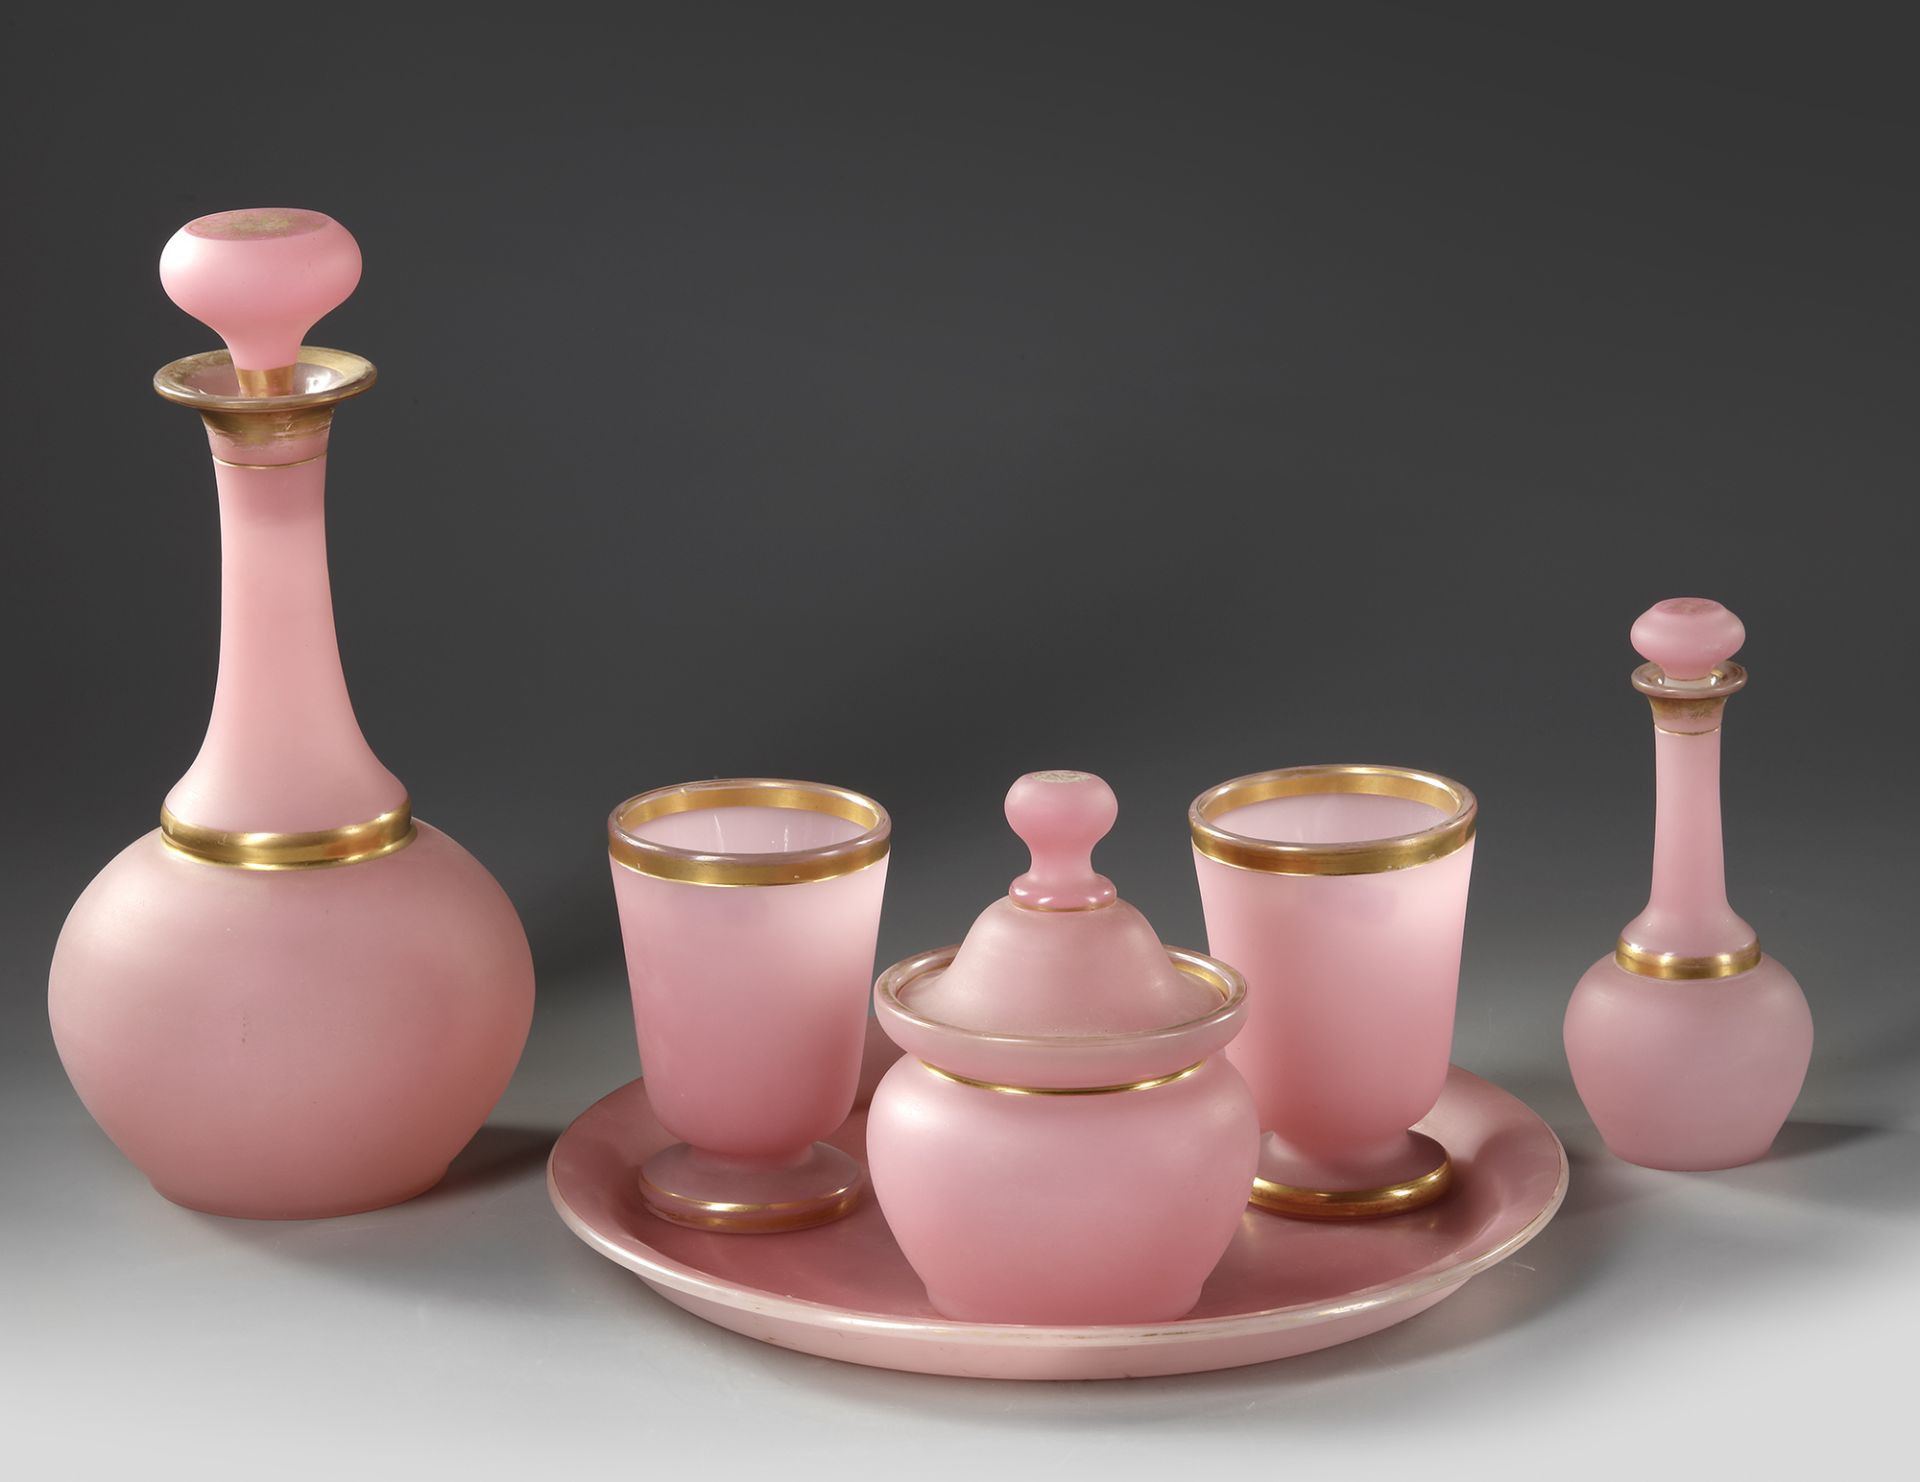 A FRENCH PINK OPALINE SERVICE SET,19TH CENTURY - Image 2 of 3